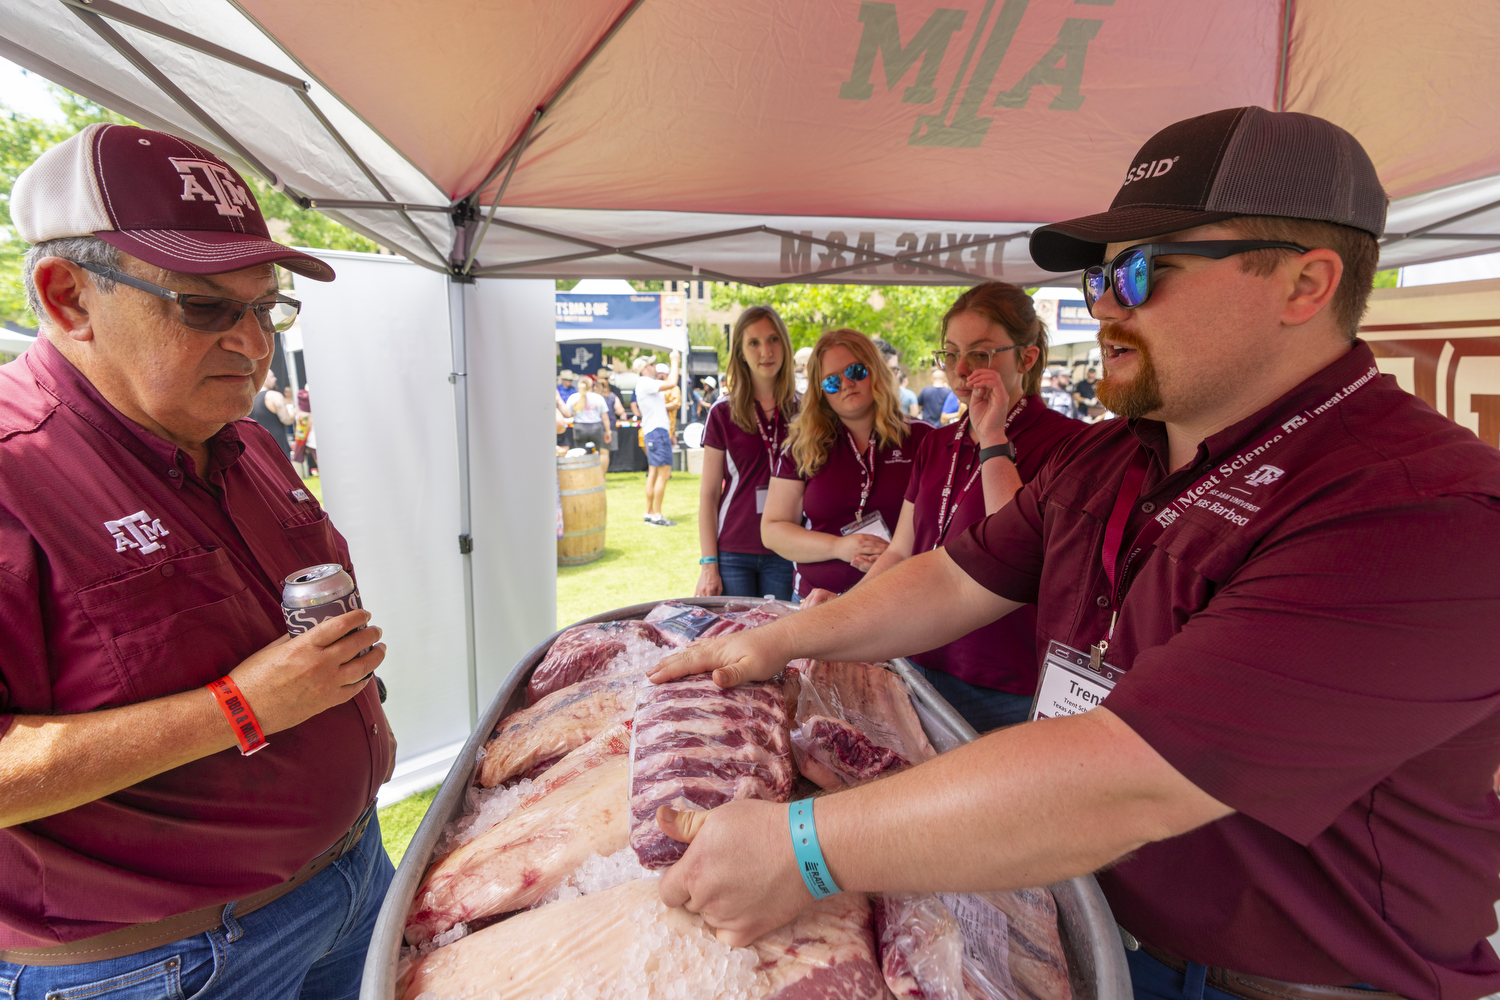 A Texas A&M student shows ribs to a guest during the Troubadour Festival